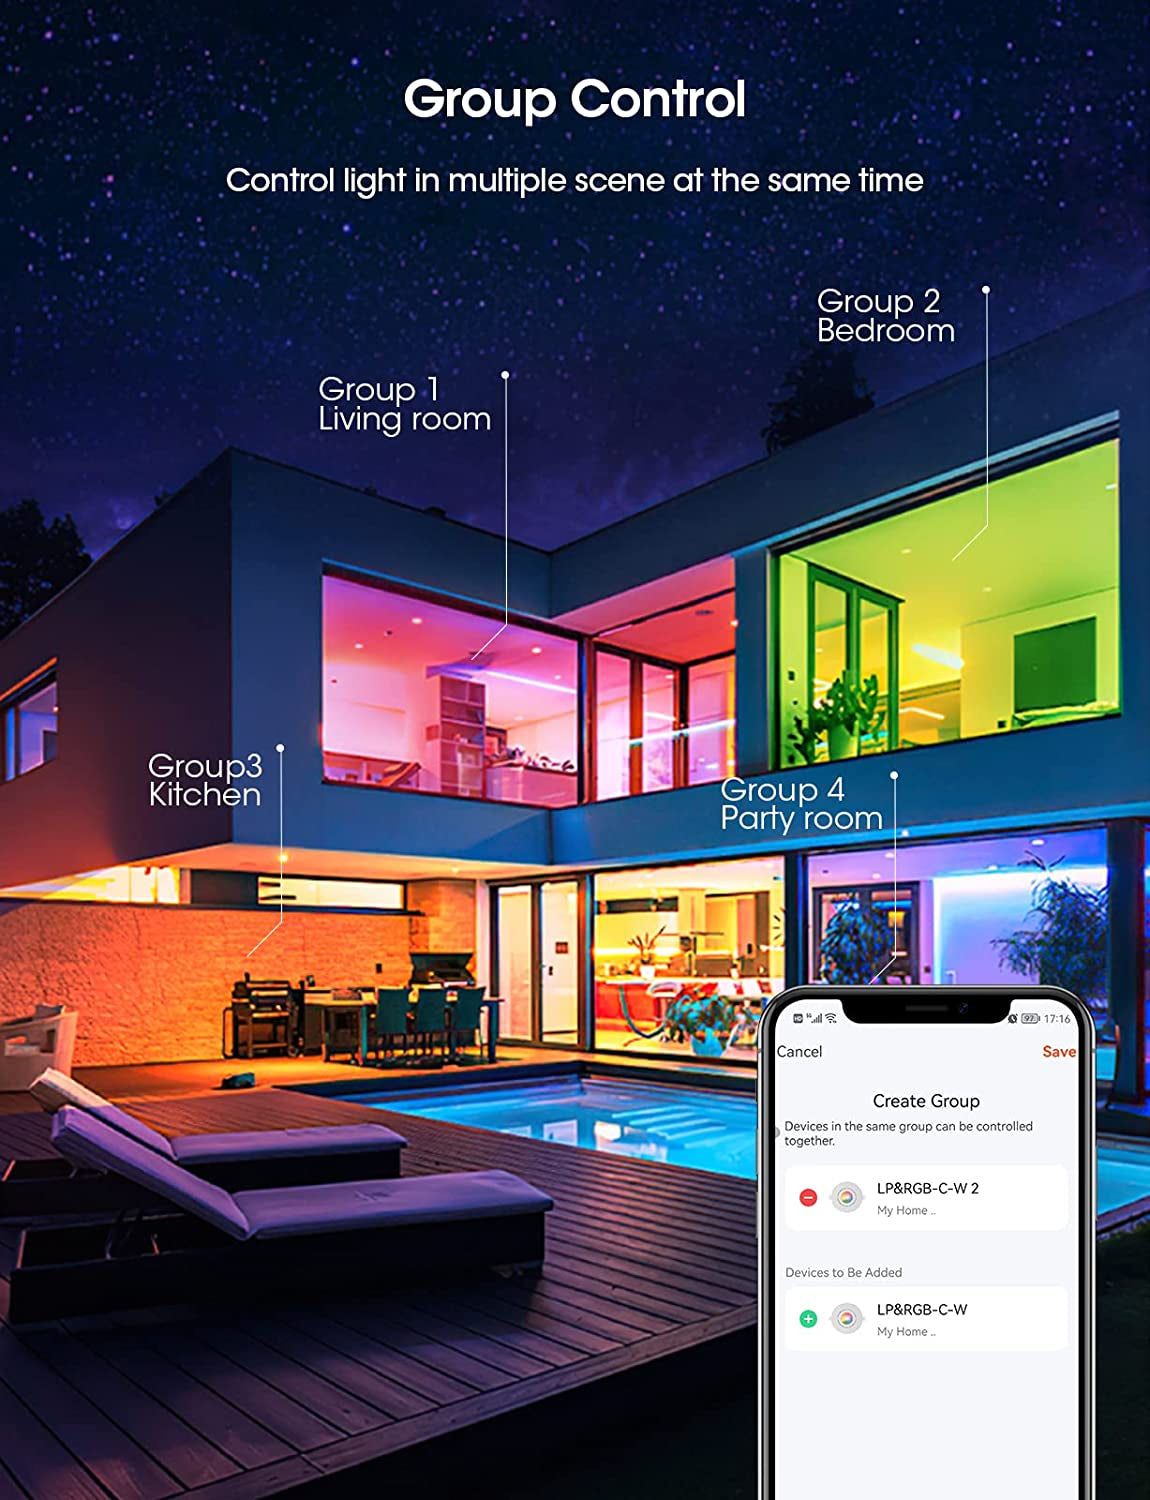 A smart home with a group control app, allowing control light in multiple scenes at the same time and seamless management